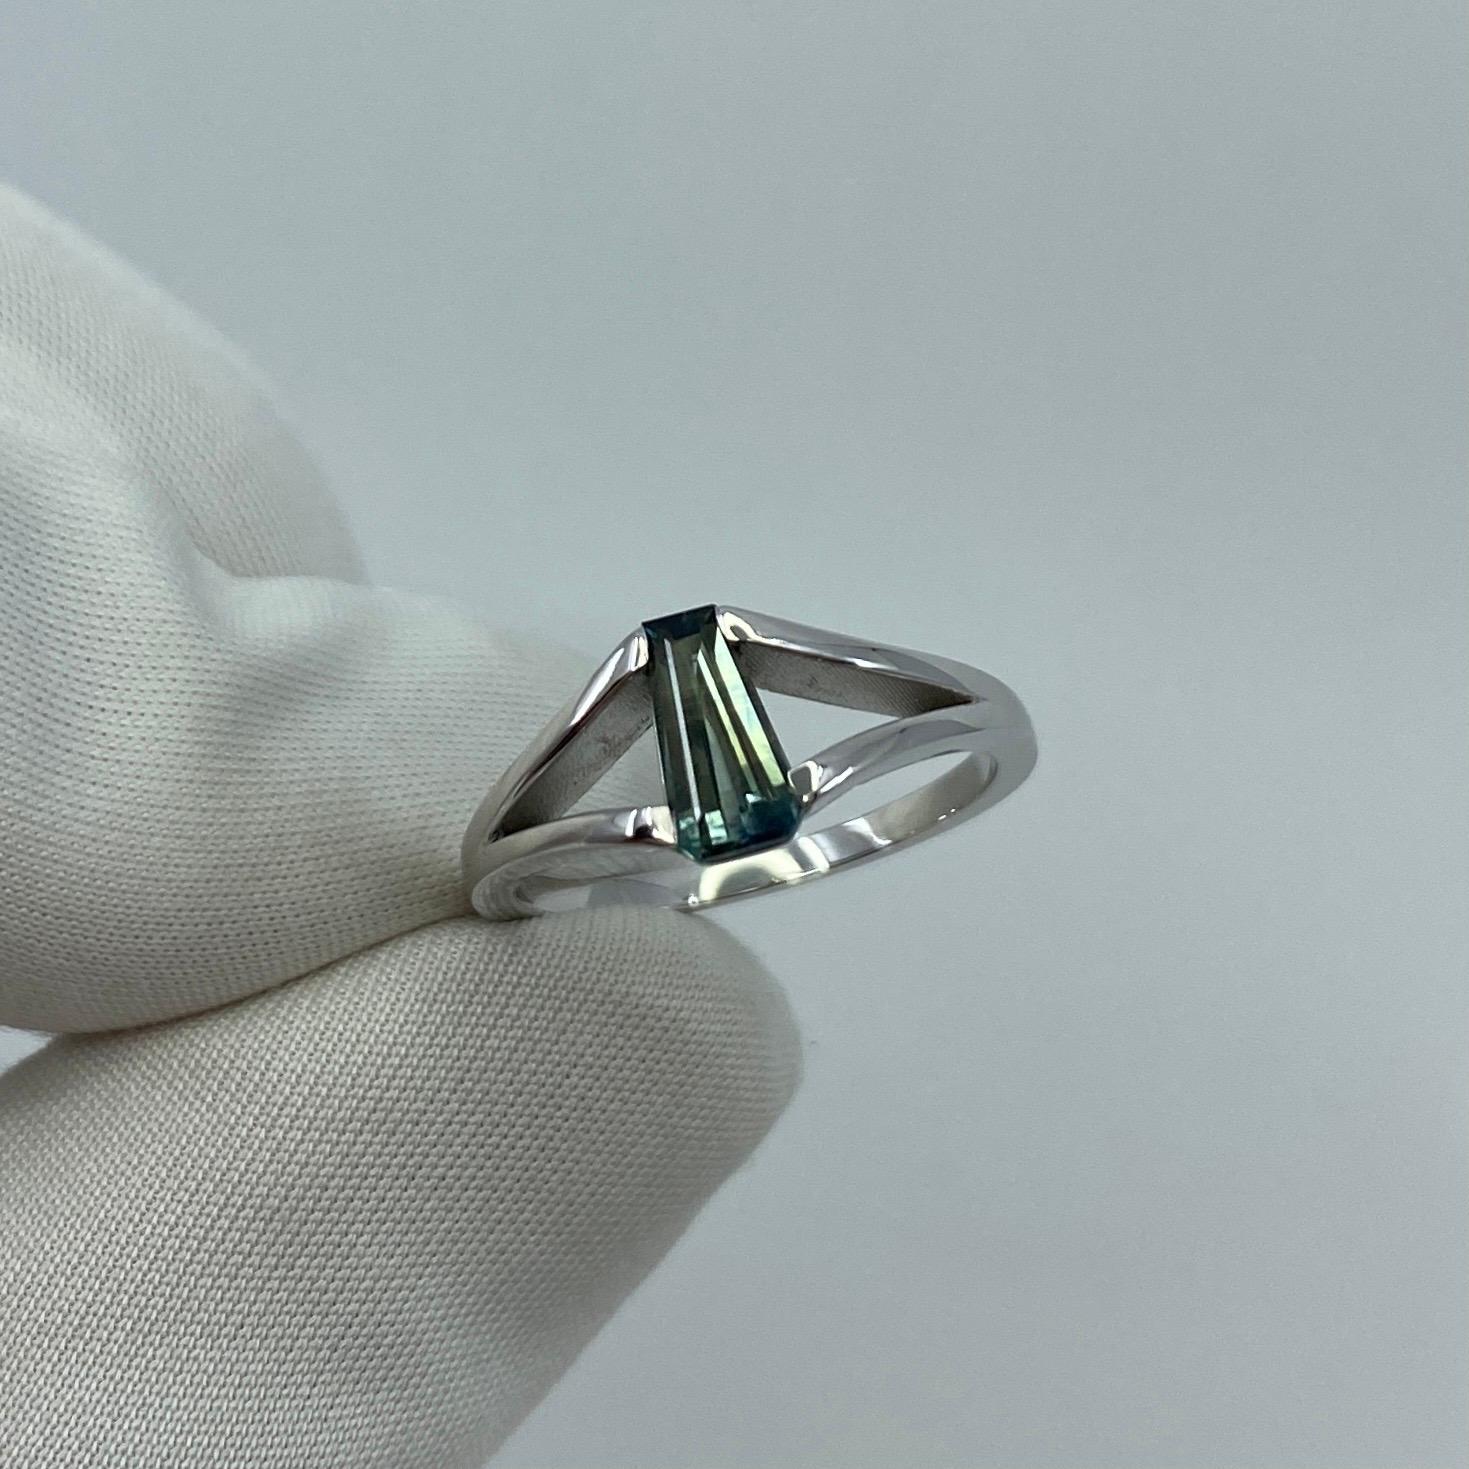 ITSIT Designed Natural Bi Colour Australian Sapphire 18k White Gold Solitaire Ring.

Unique 0.87 Carat Australian sapphire with a stunning green blue bi colour effect. Has excellent clarity, very clean stone with only some small inclusions visible